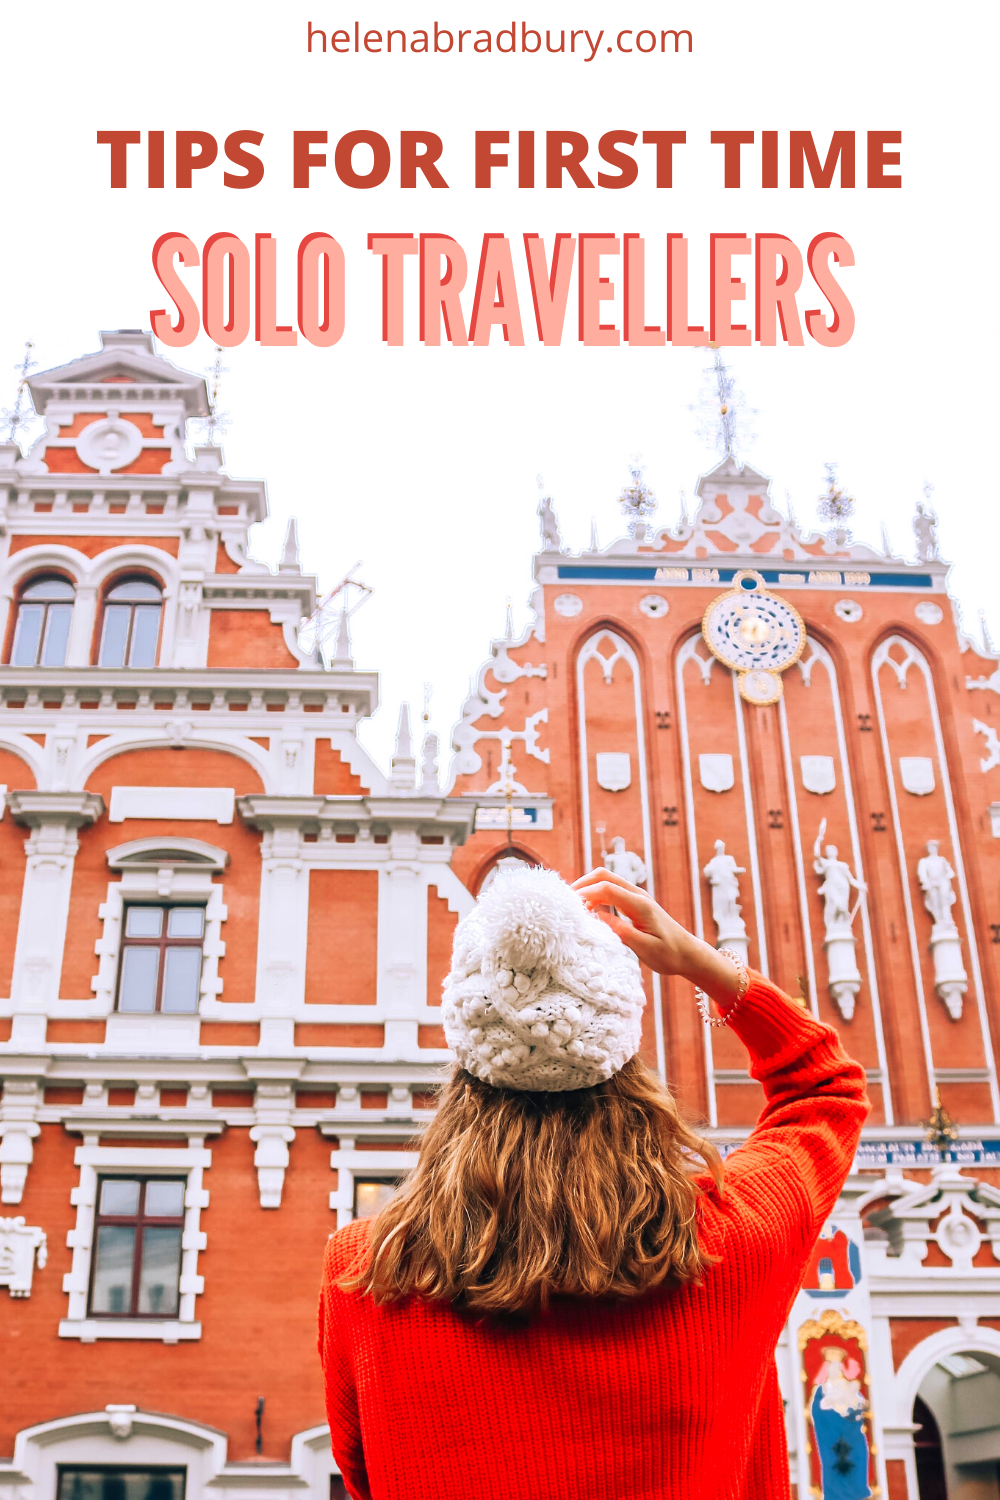 How to travel by yourself: tips for first time solo travellers